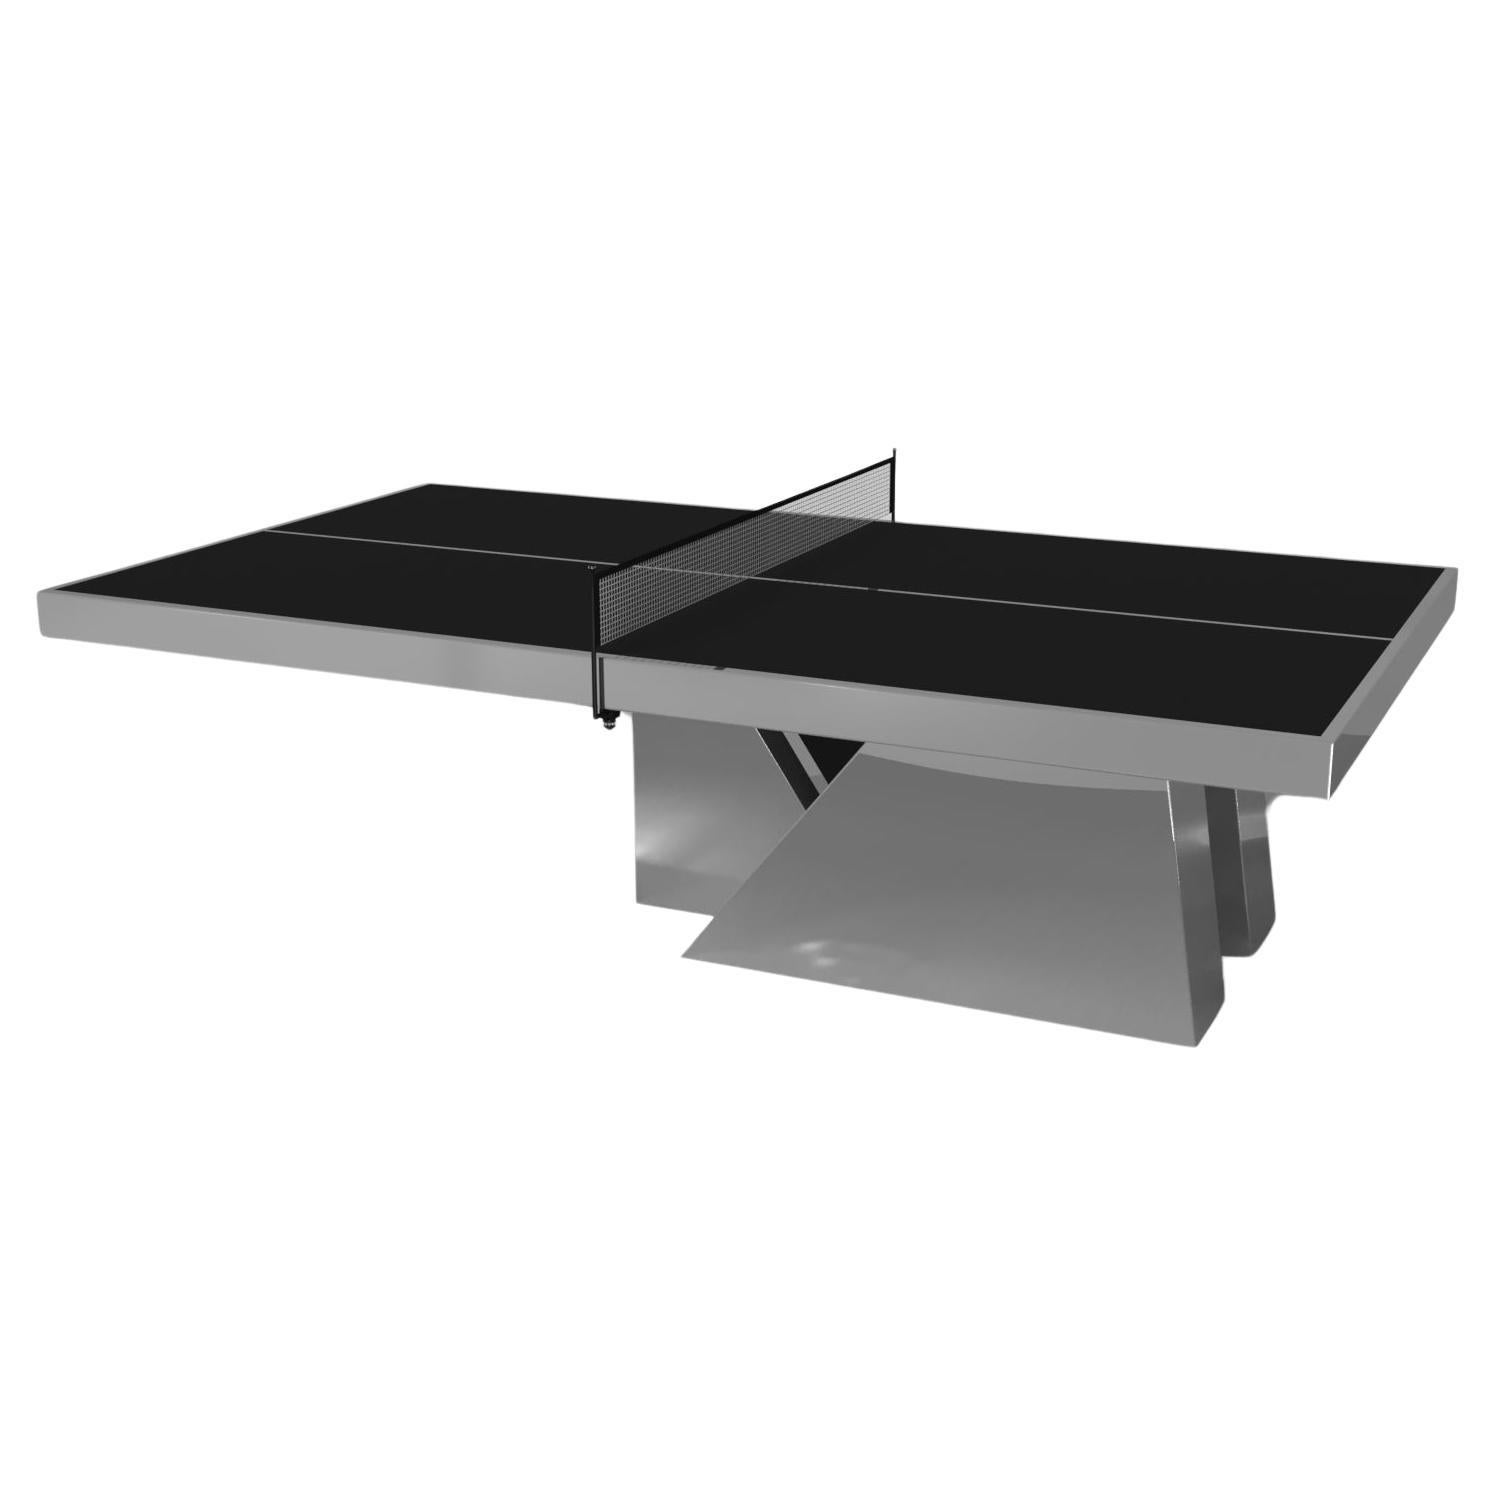 Elevate Customs Stilt Tennis Table / Stainless Steel Metal in 9' - Made in USA For Sale